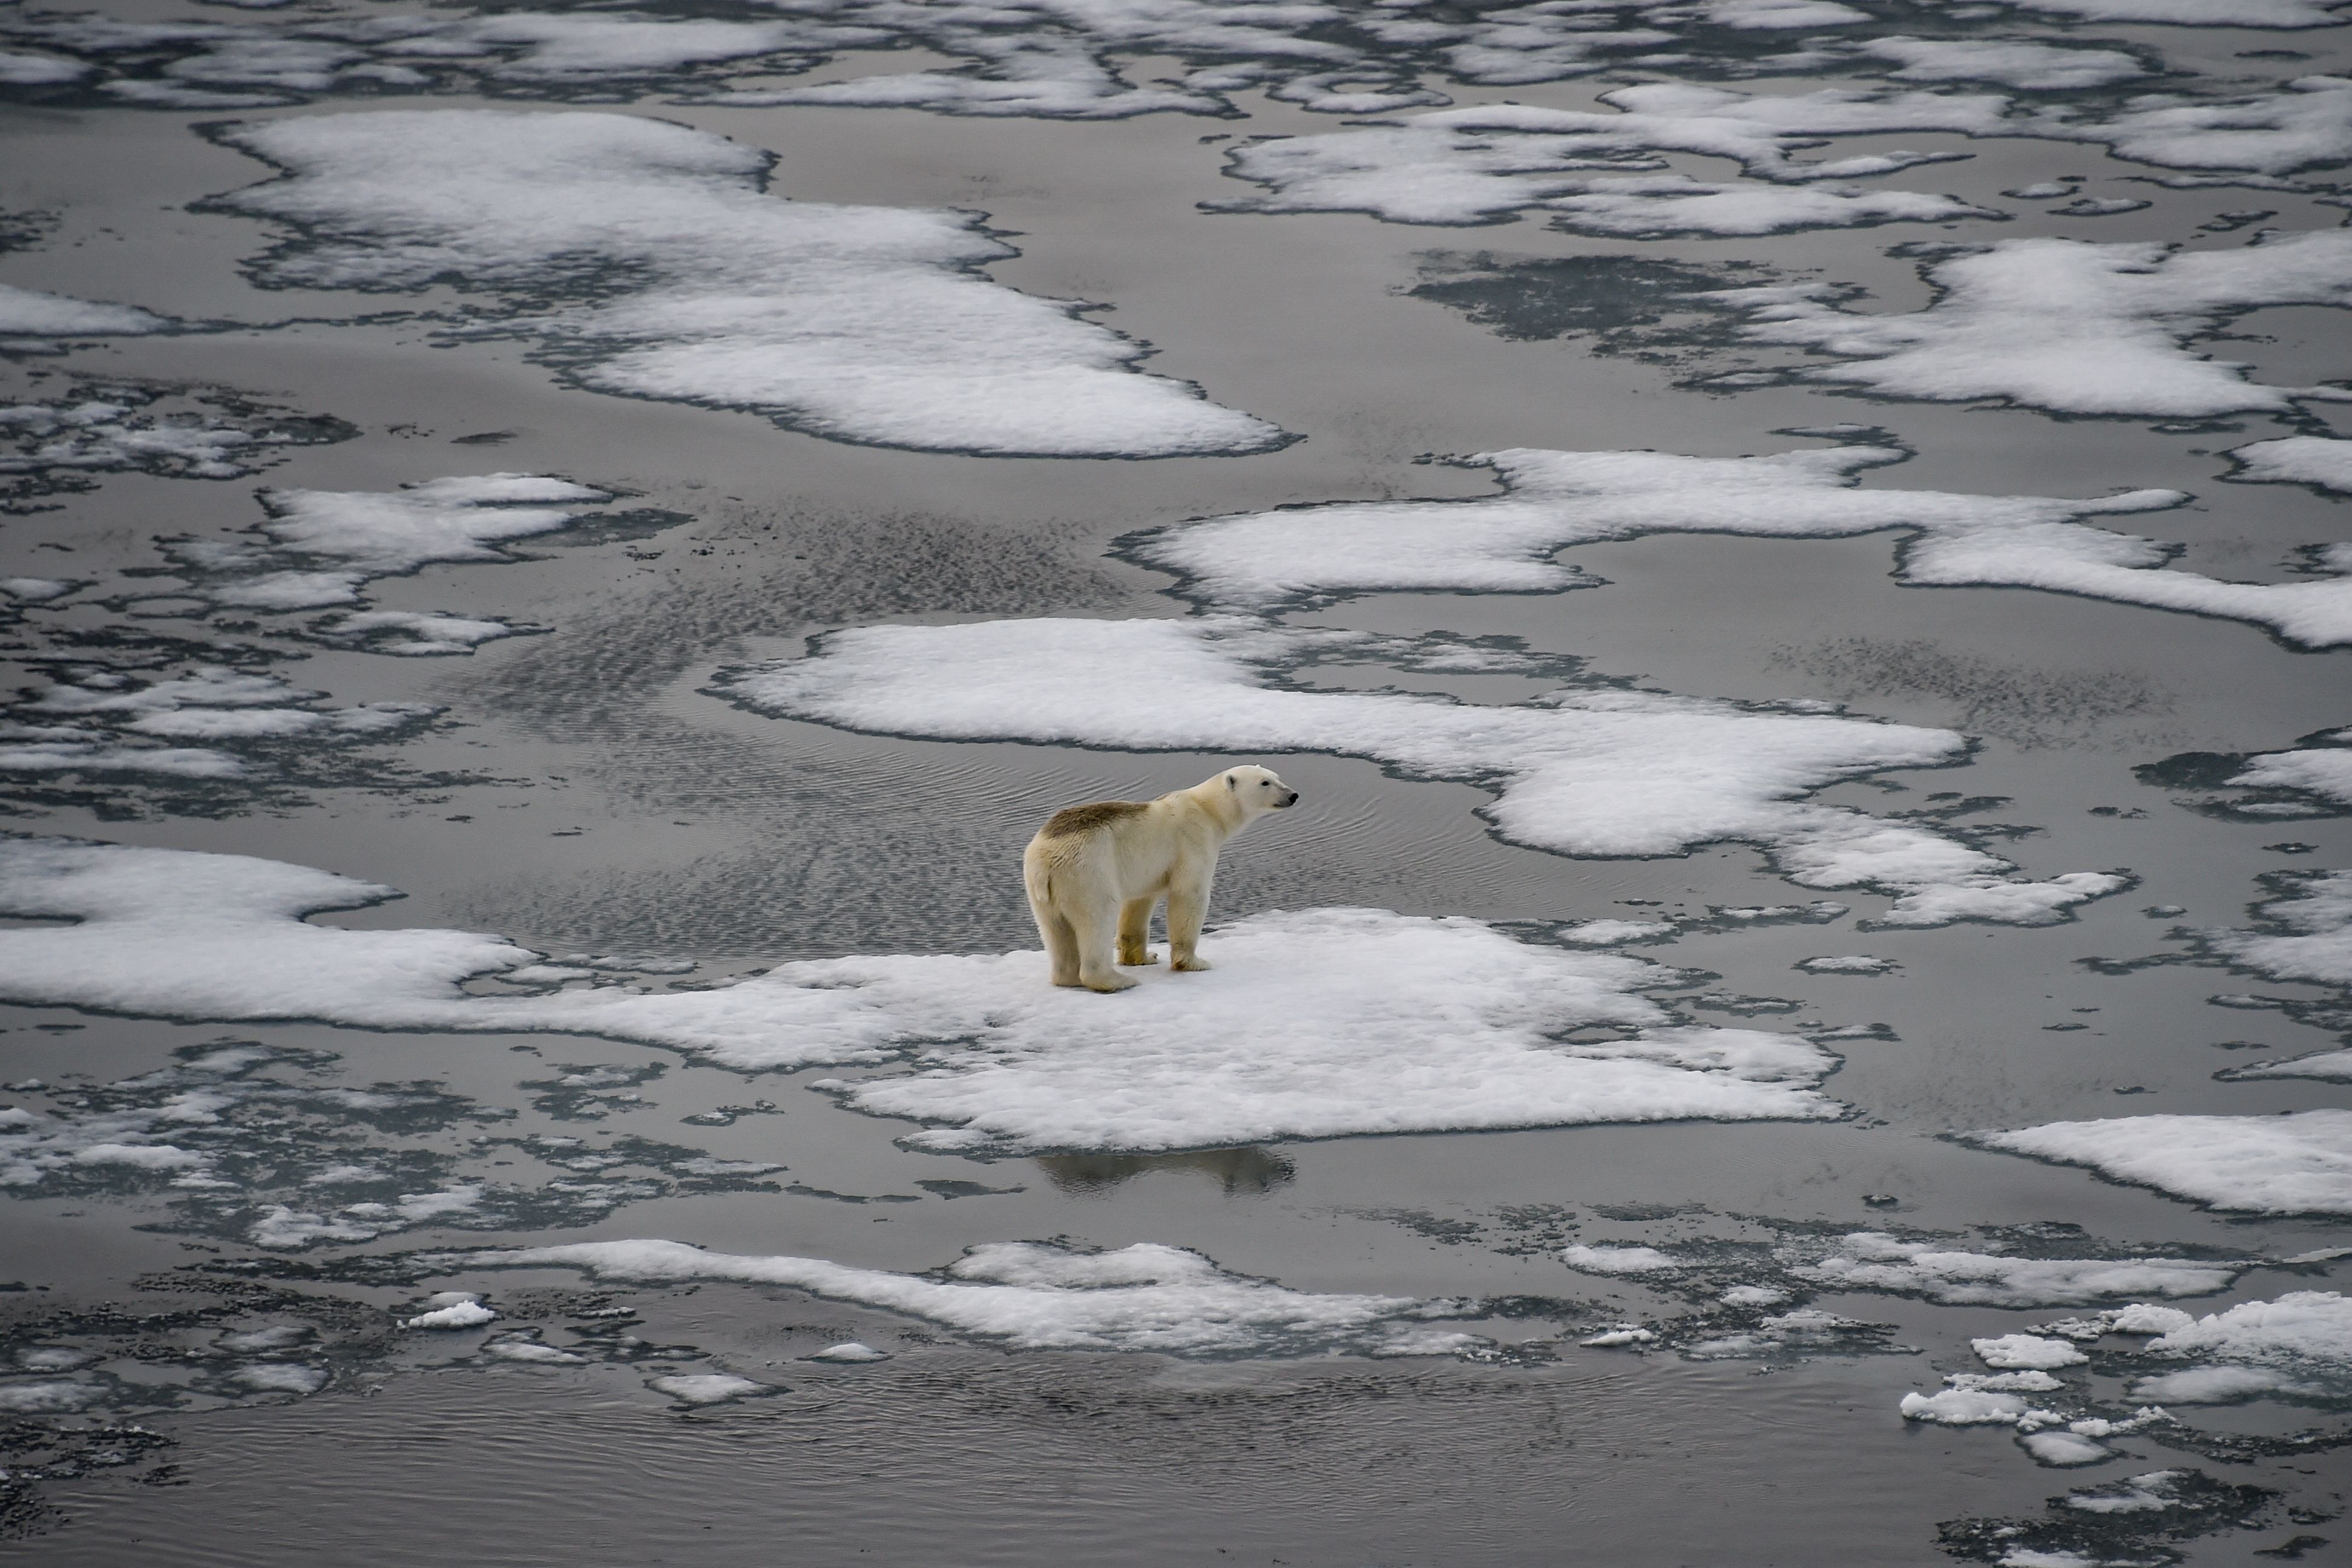 Recent collar camera footage shows that polar bears are starving